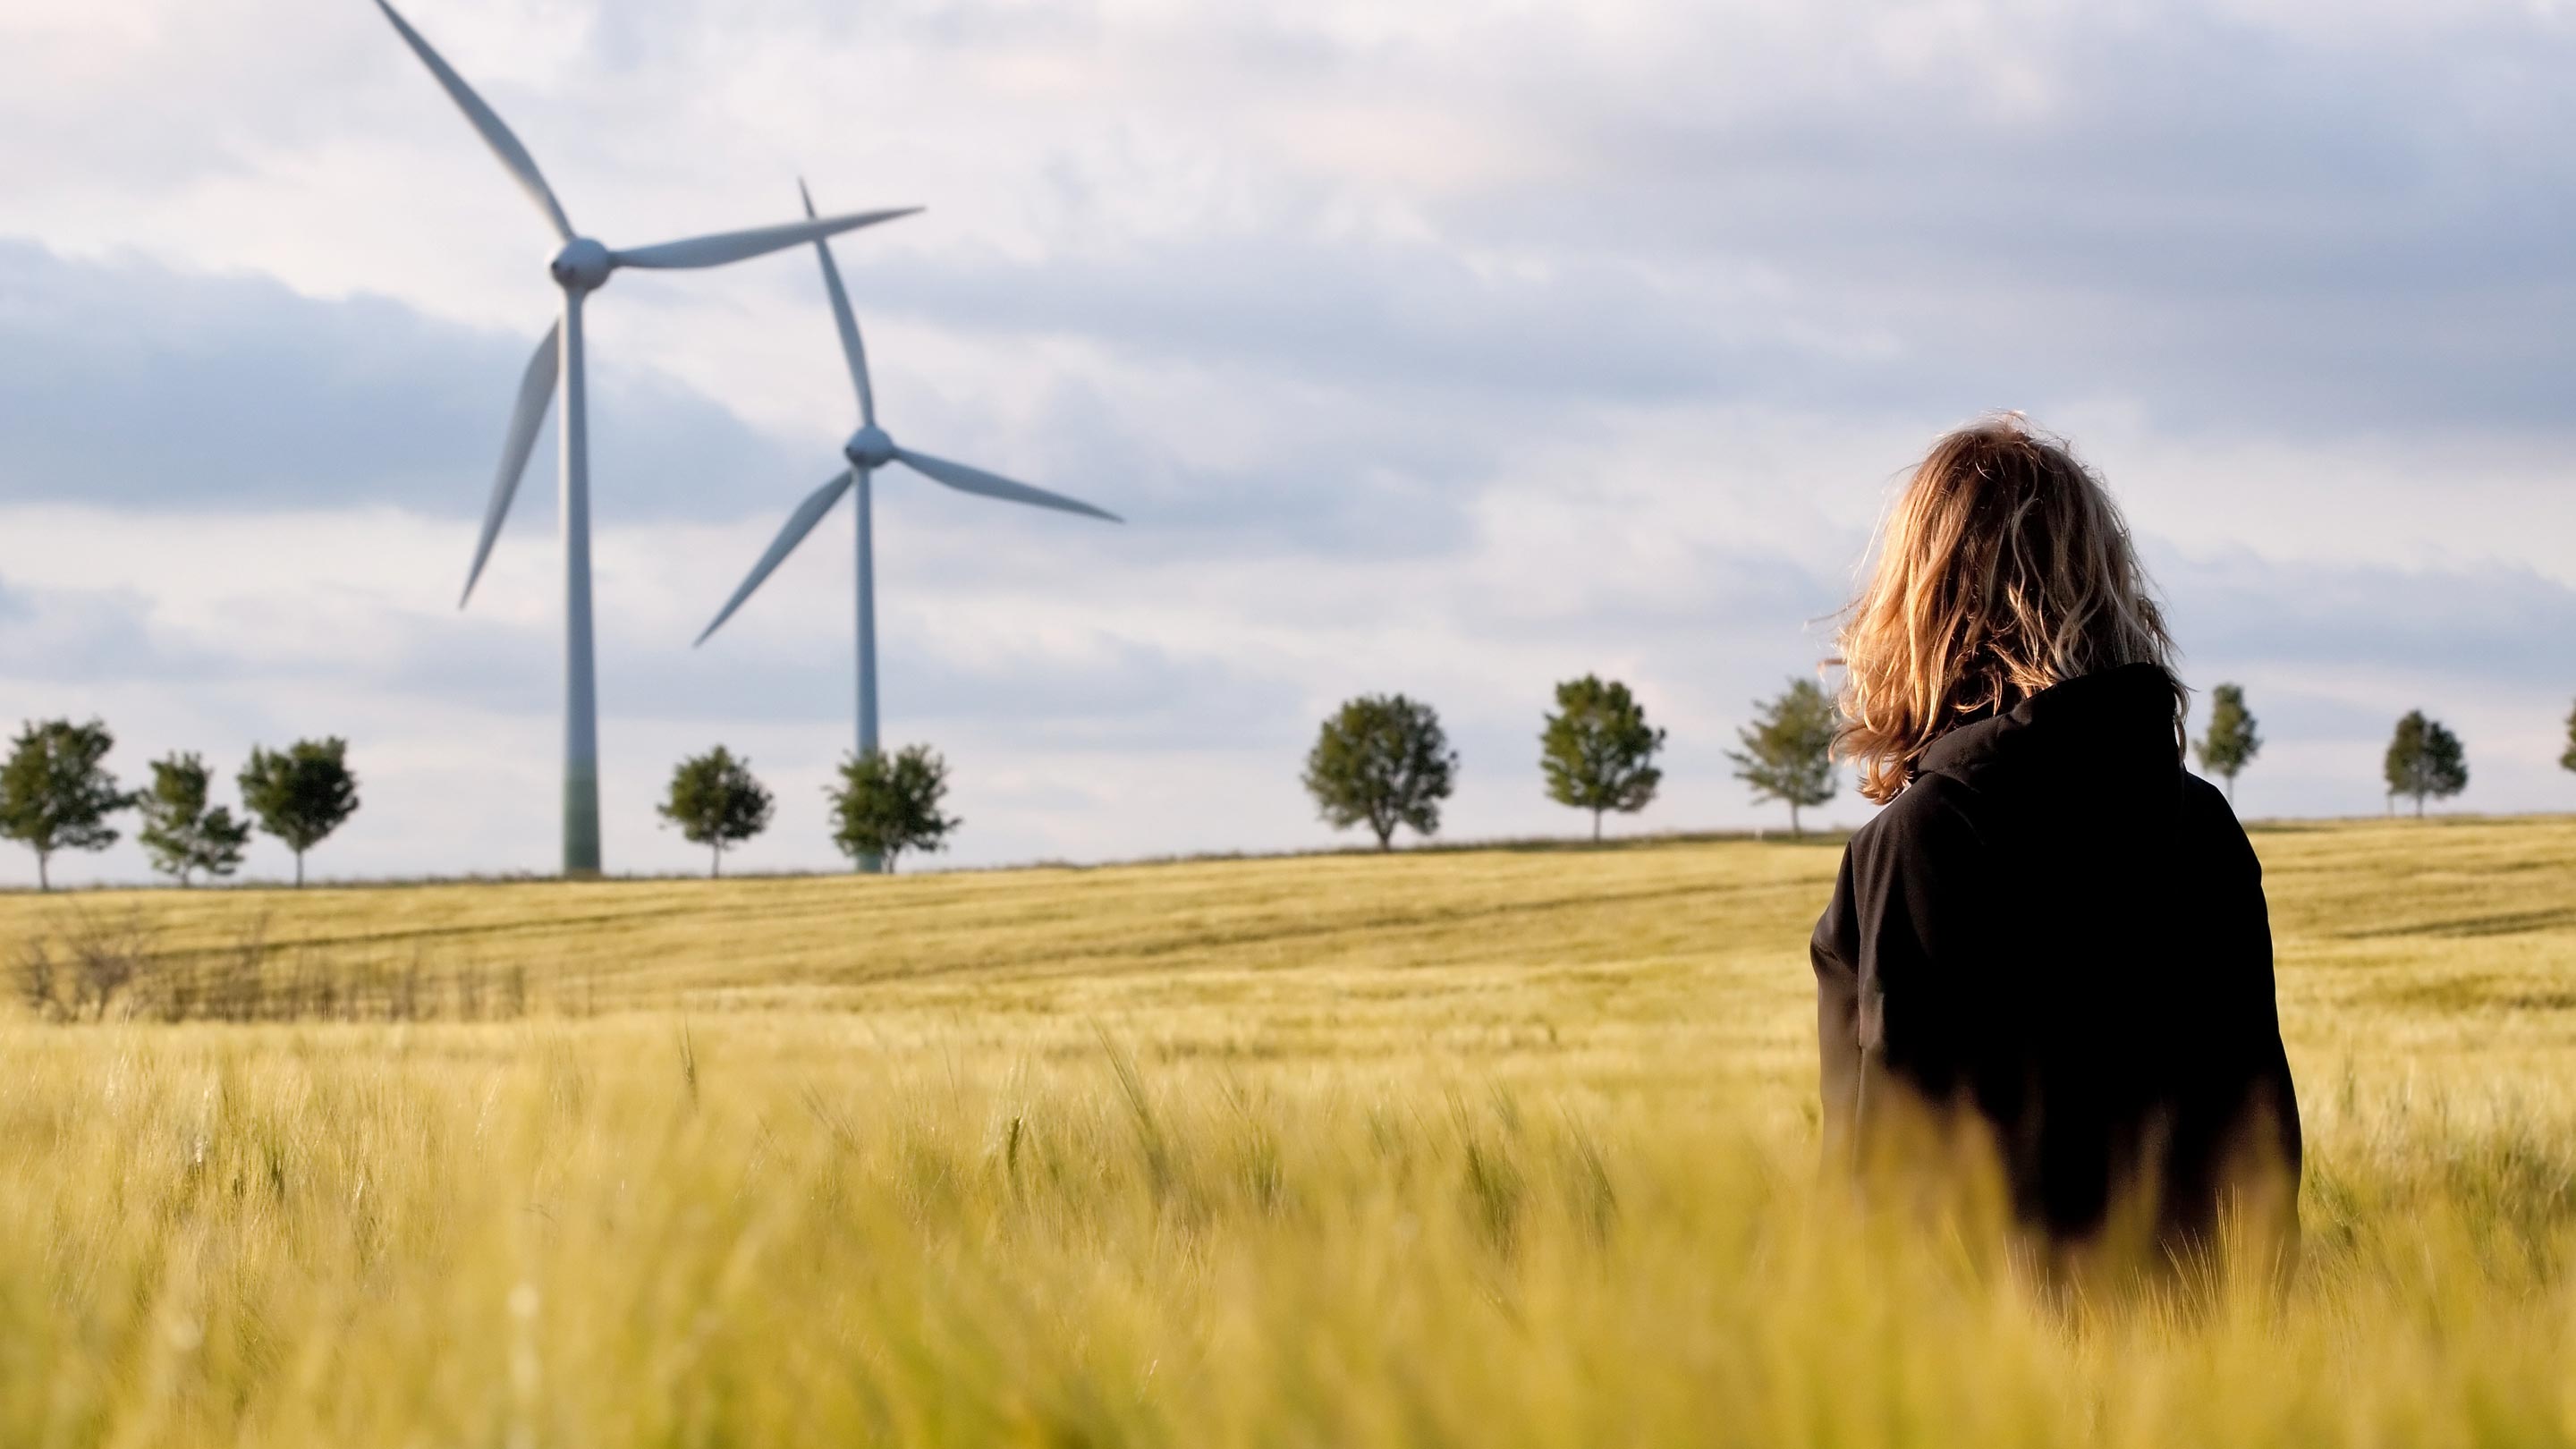 Person in a field looking at wind turbines, contemplating ethical investment decisions